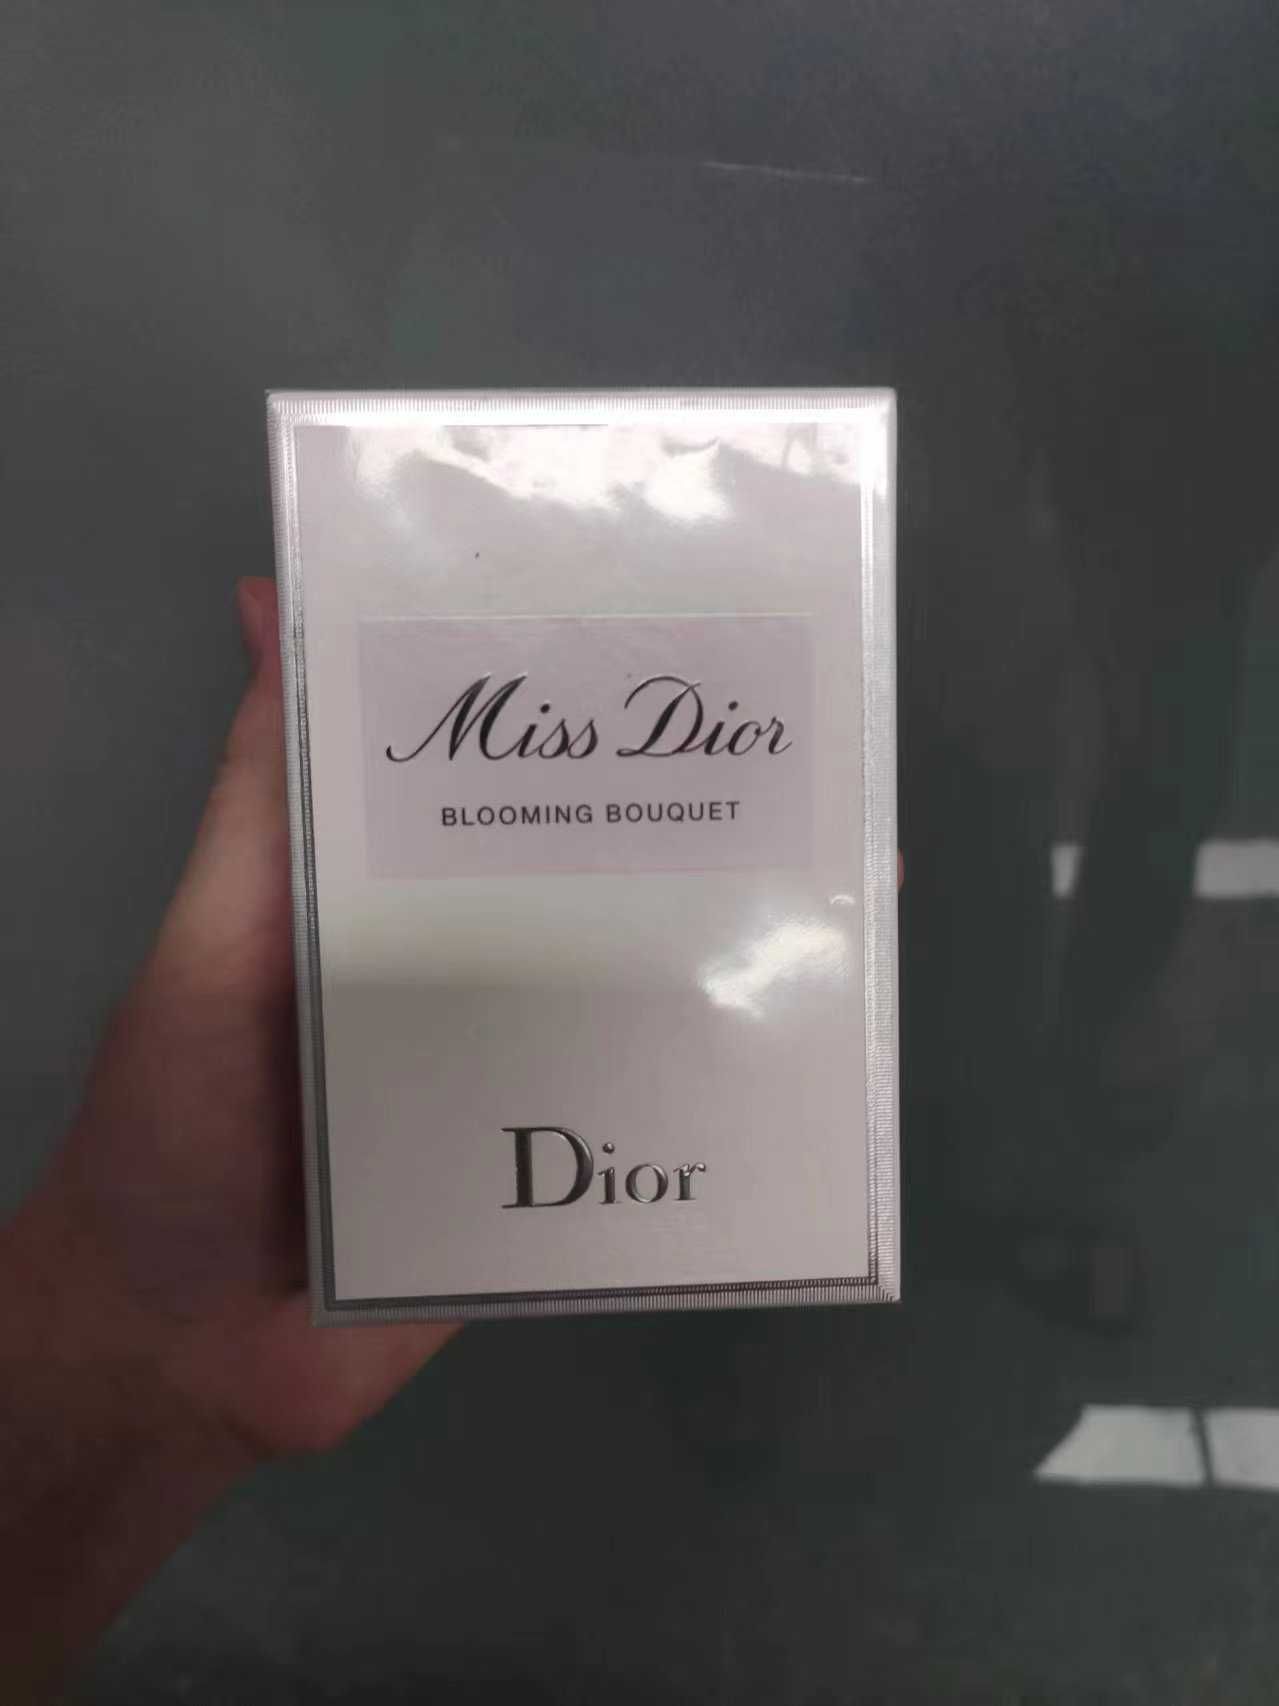 Send your mother beautiful Dior blooming bouqet  100ml